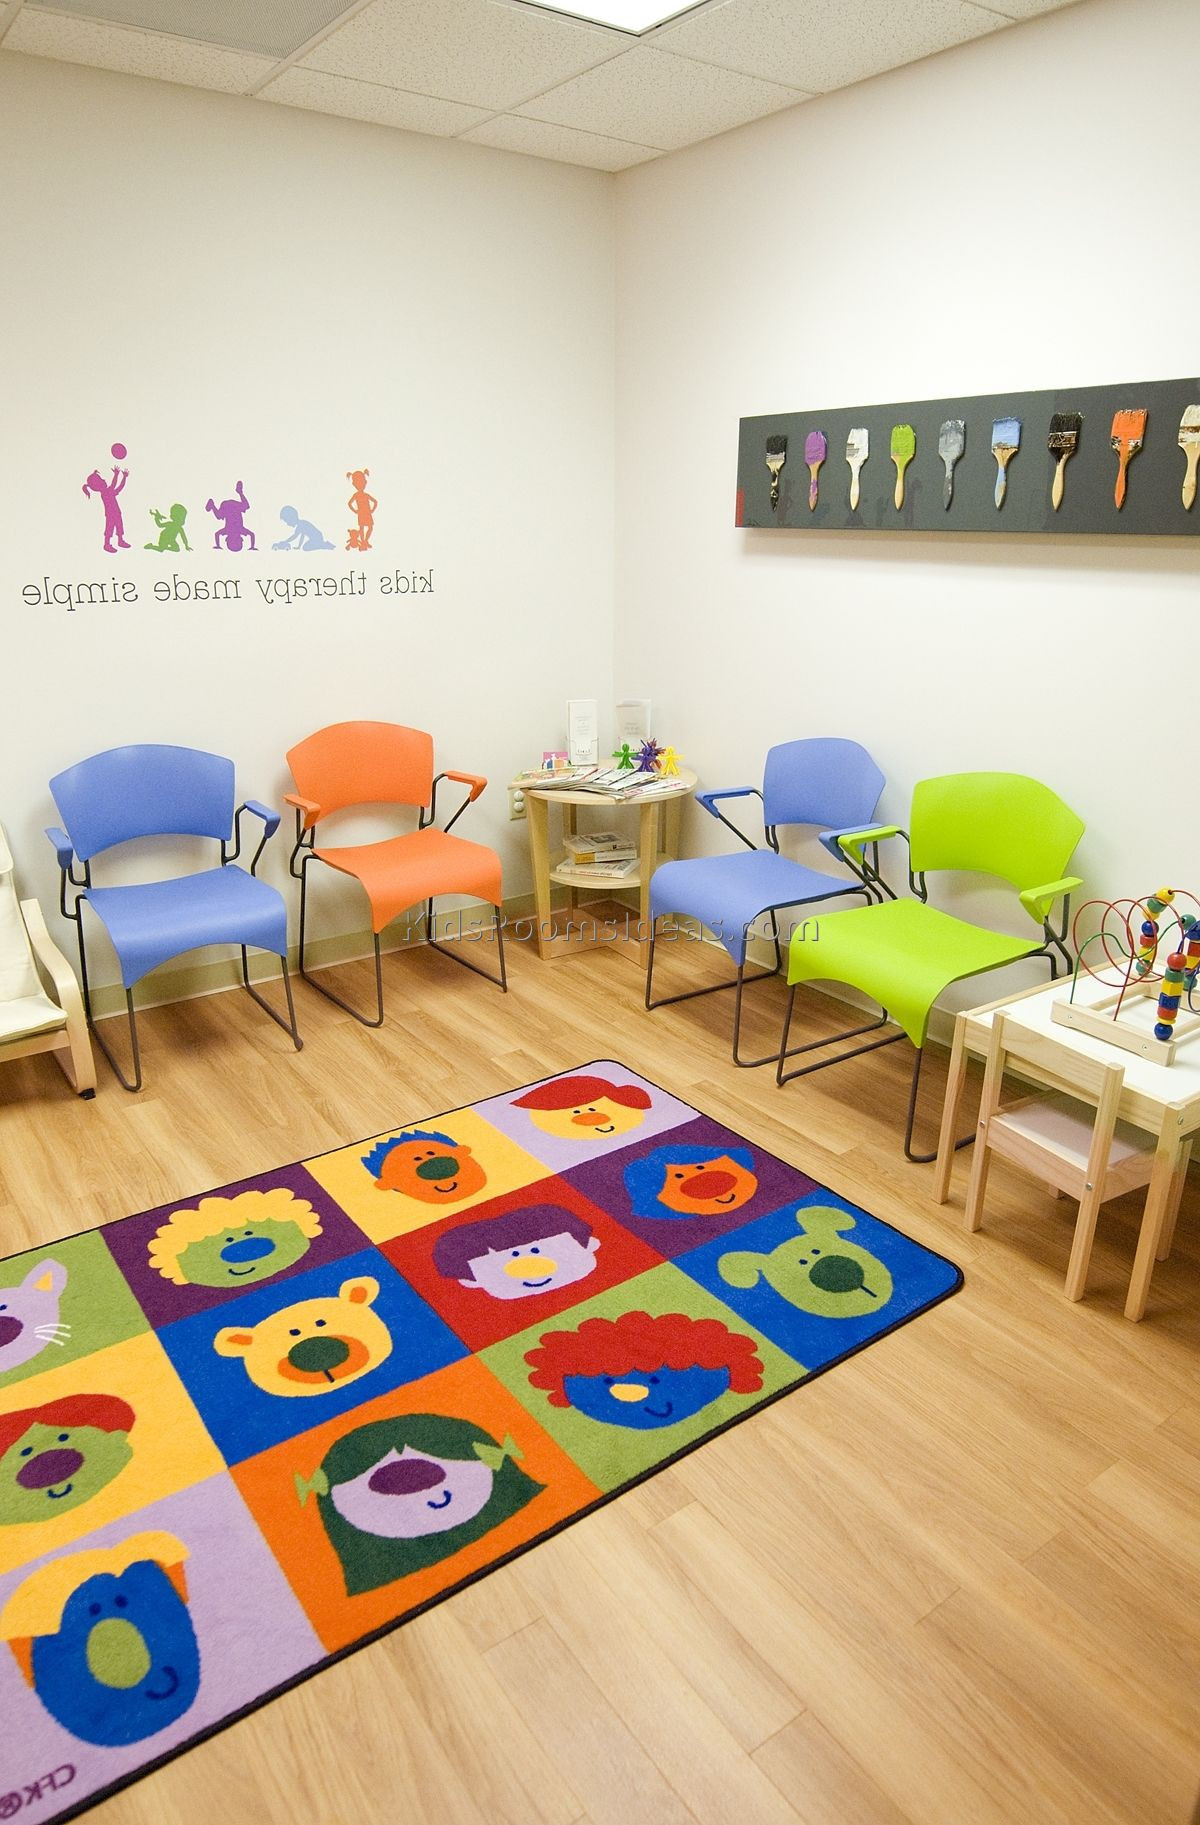 Kids Waiting Room Furniture
 Waiting Room Toys Daycare Furniture Kids fice Ideas